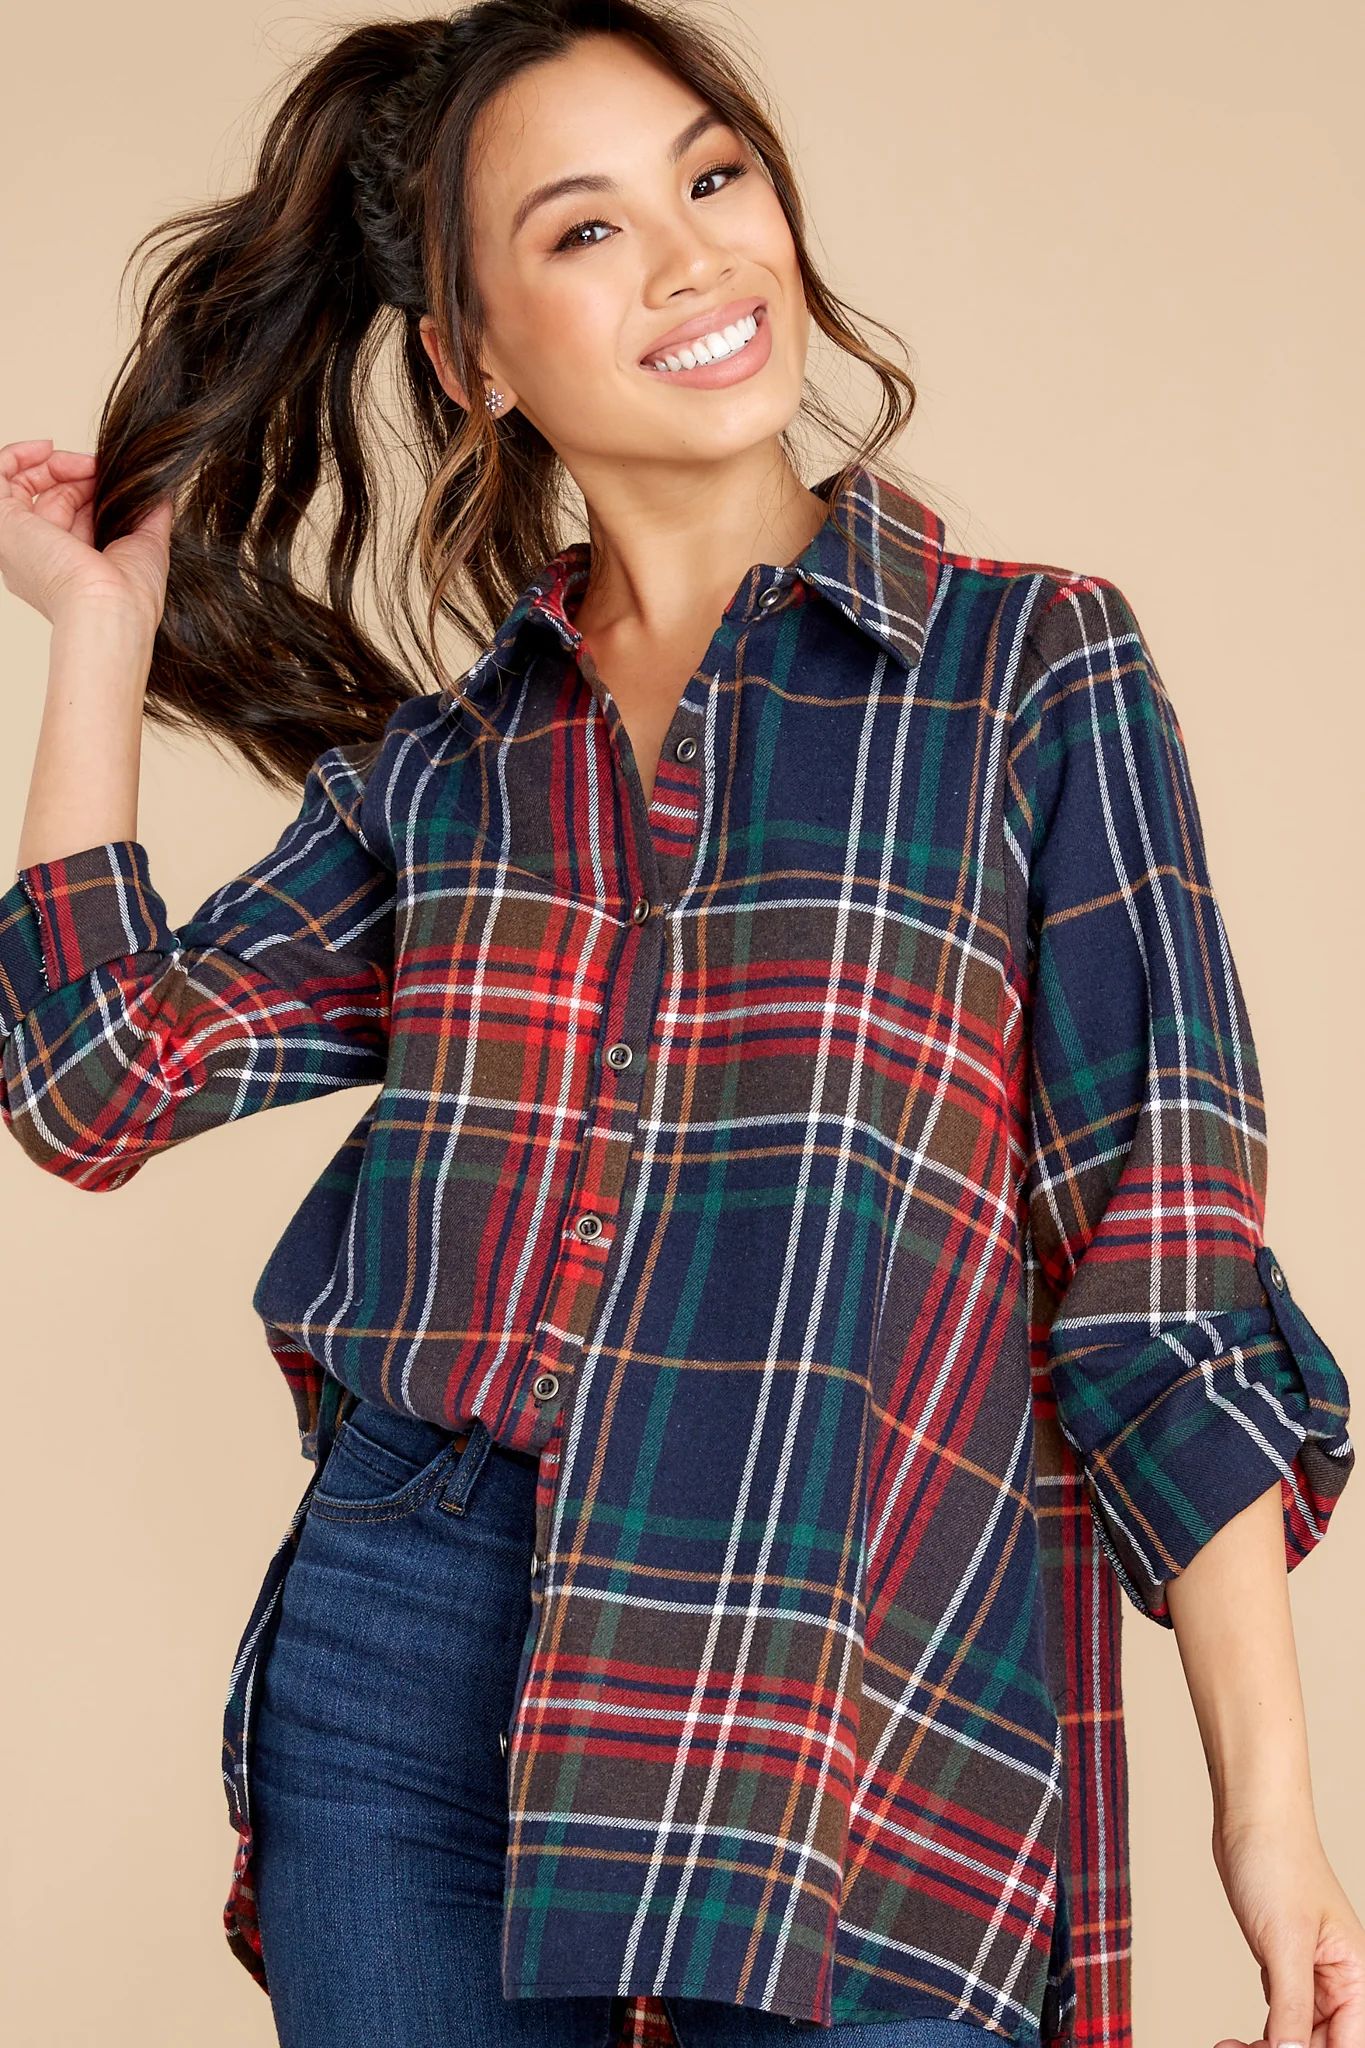 Just Like Home Navy Multi Plaid Top | Red Dress 